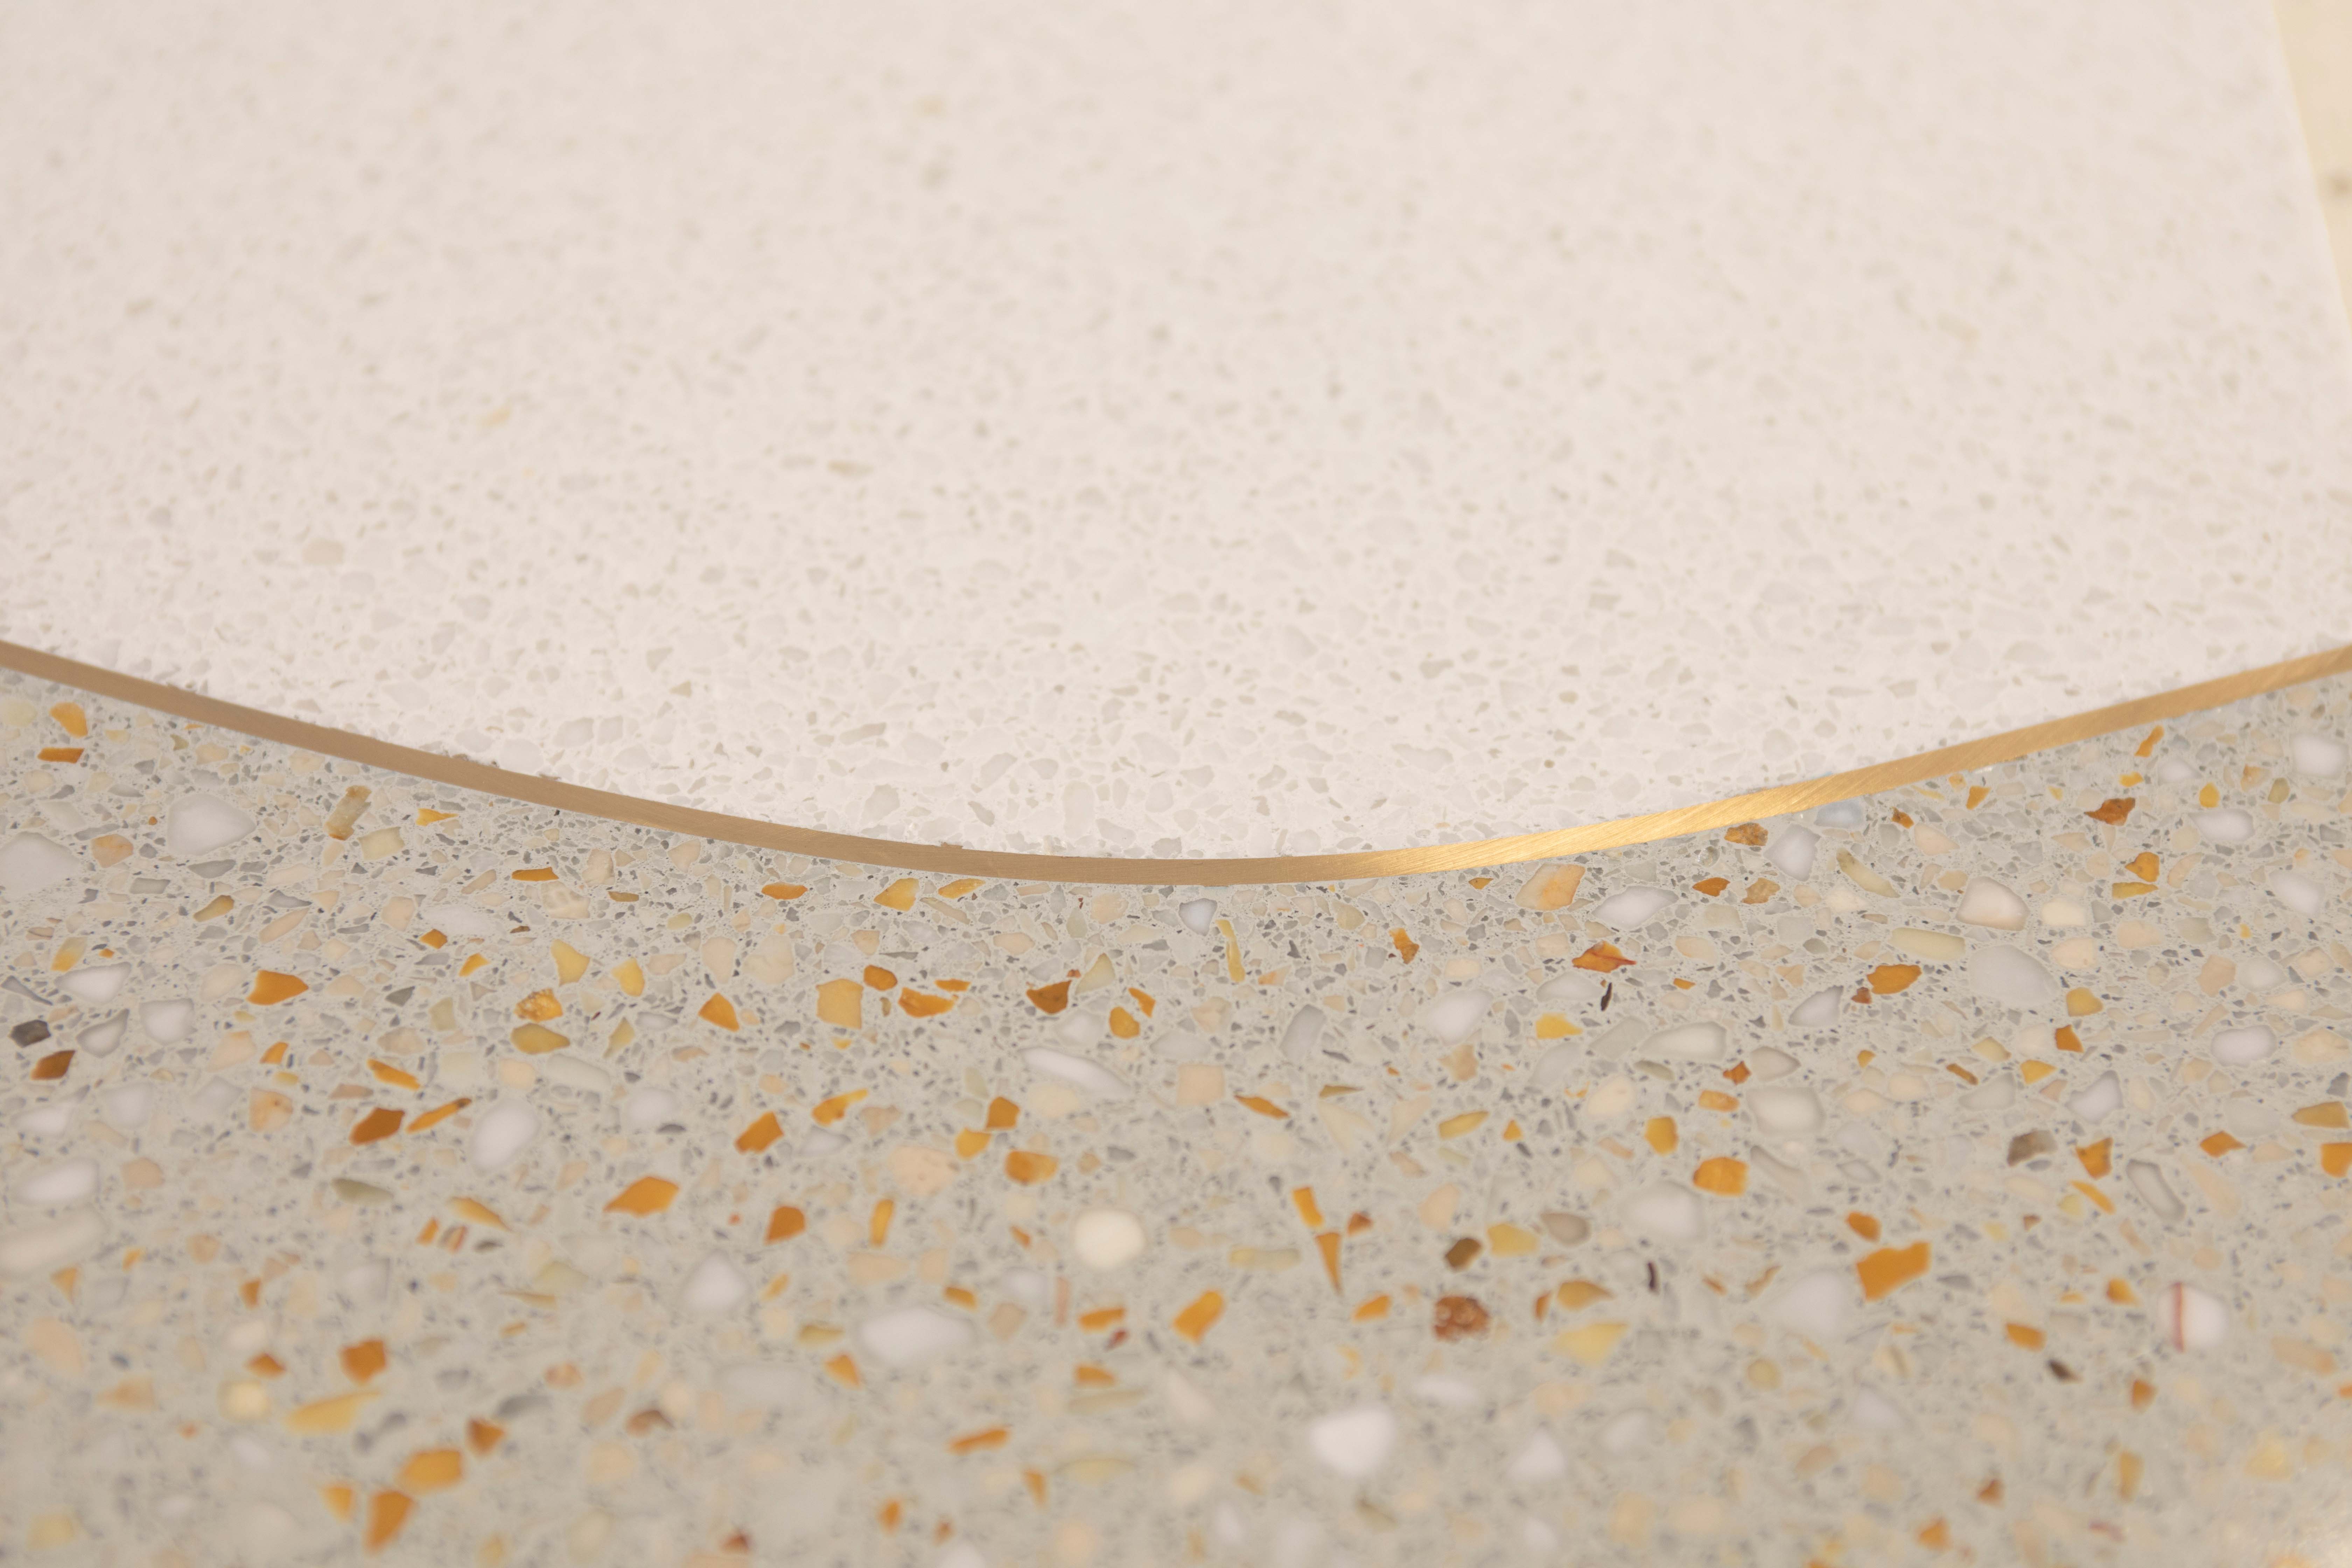 Flowcrete is launching its new formulation Mondeco at Futurebuild, its new long-lasting seamless terrazzo, re-engineered for 2022 and beyond.